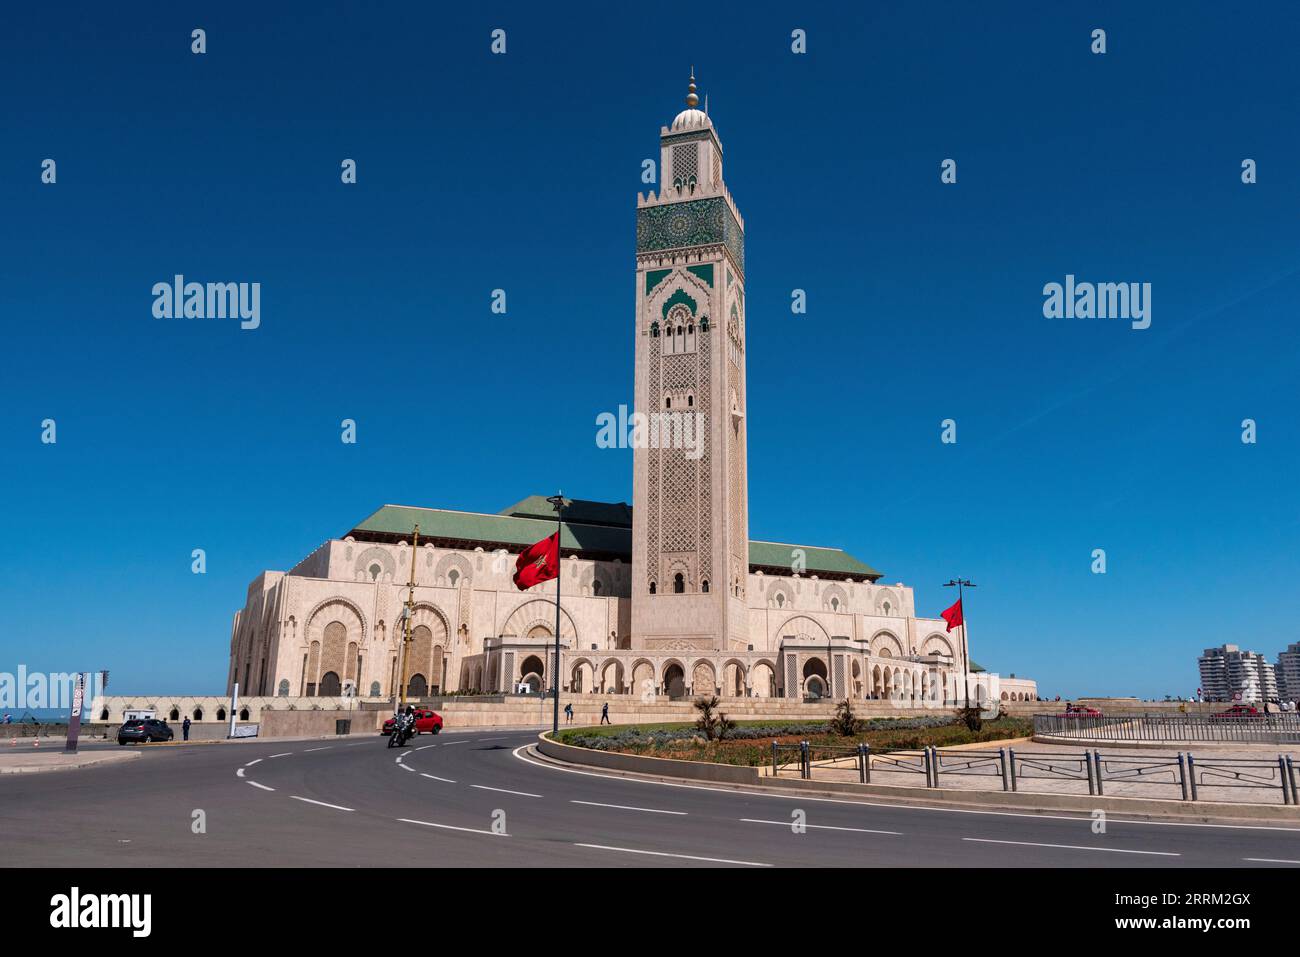 Exterior of the famous Hassan II Mosque at the coast of Casablanca, Morocco Stock Photo